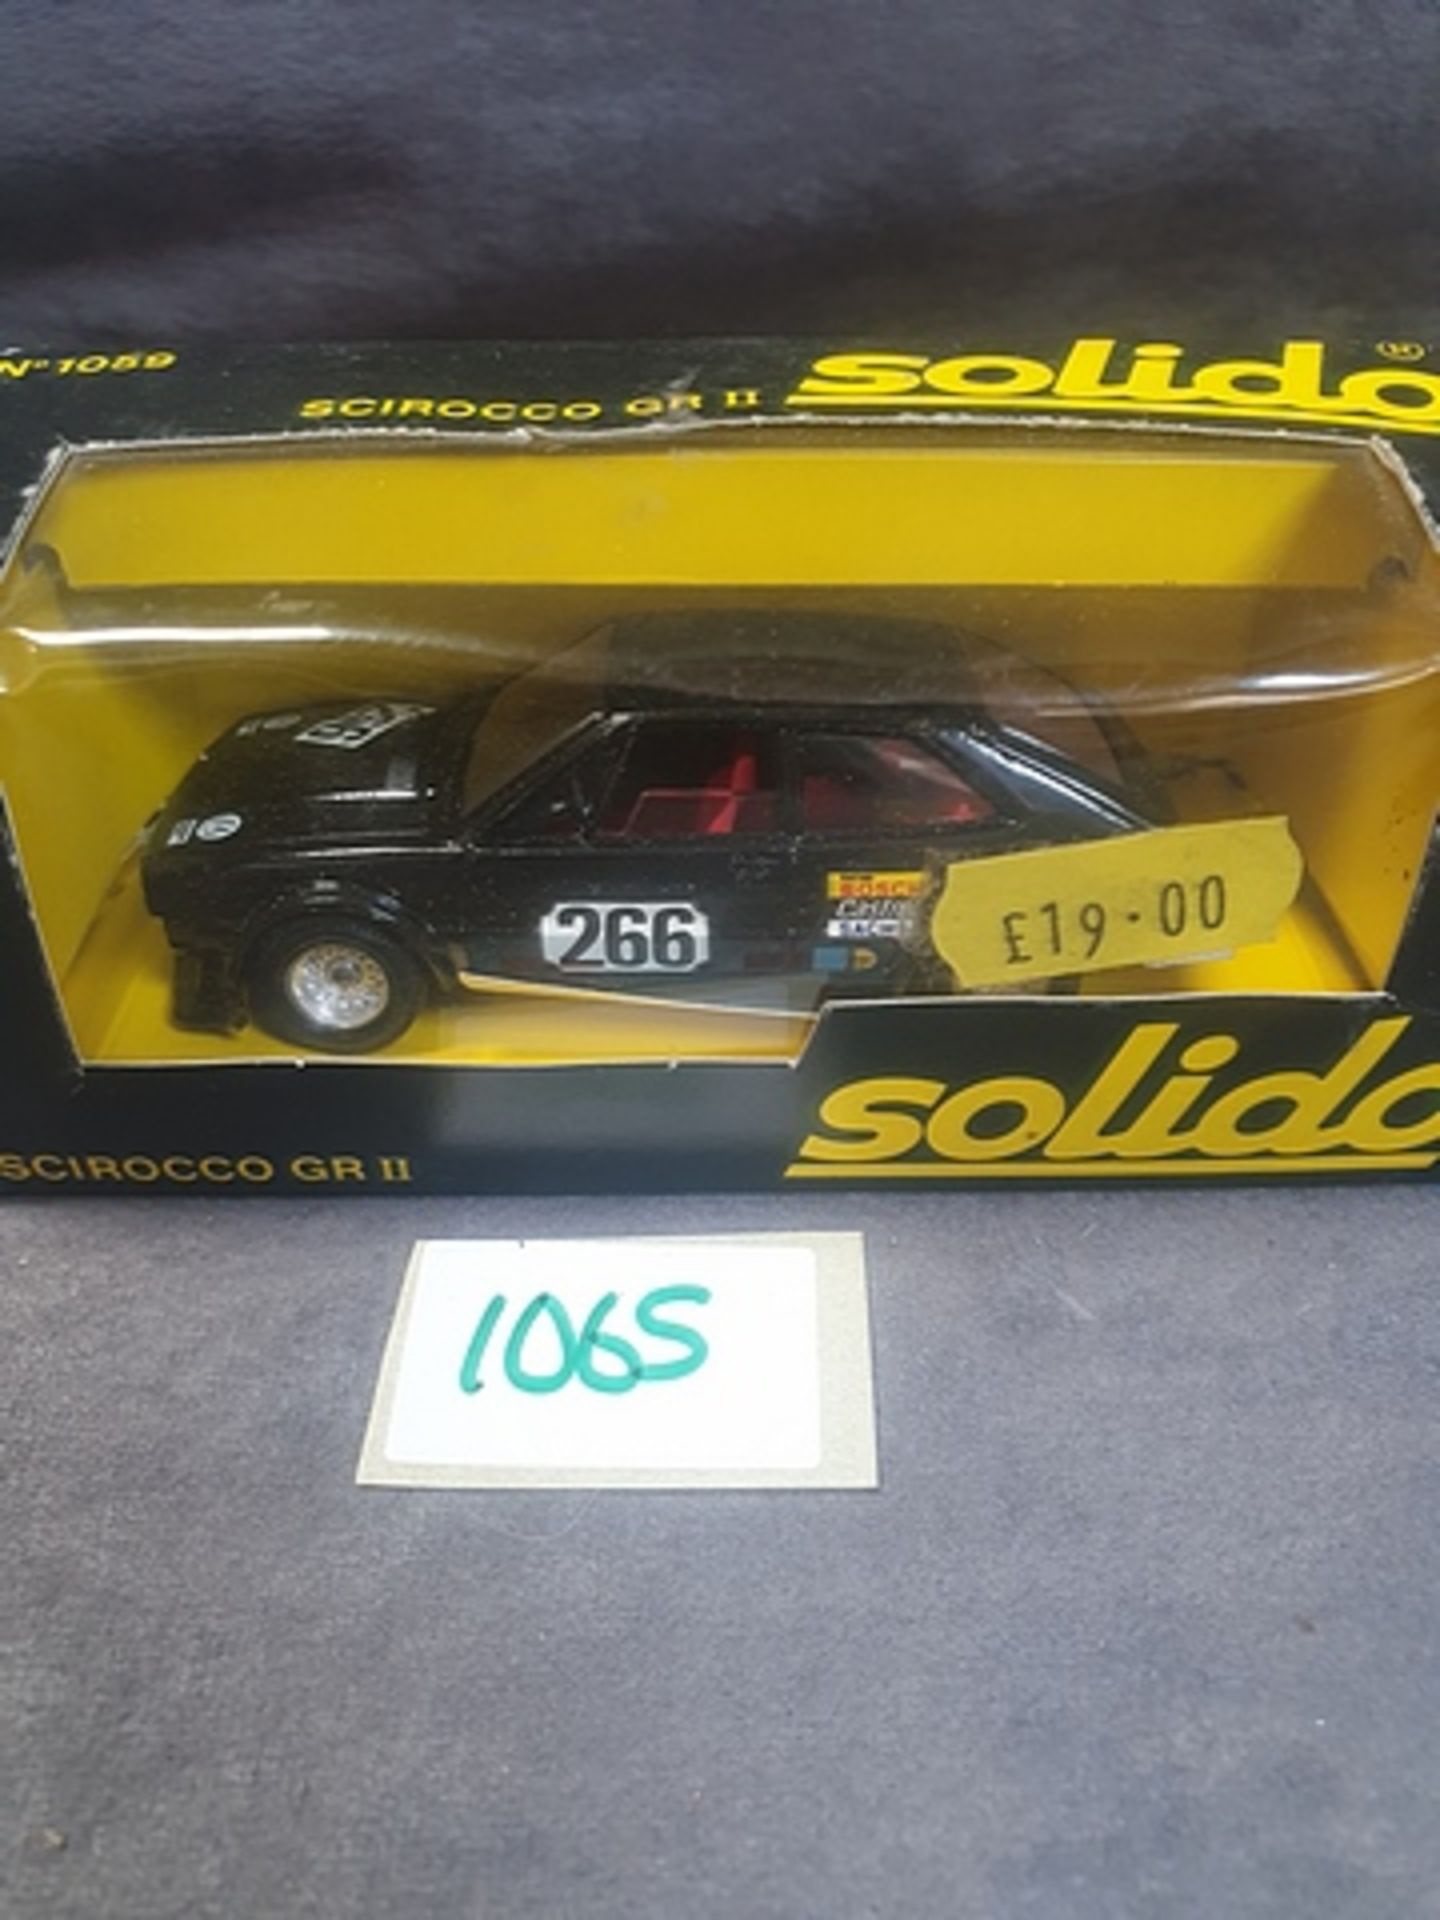 Solido (France) Diecast # 1059 Scirocco GR II In Black With Racing Number 266 Complete With Box